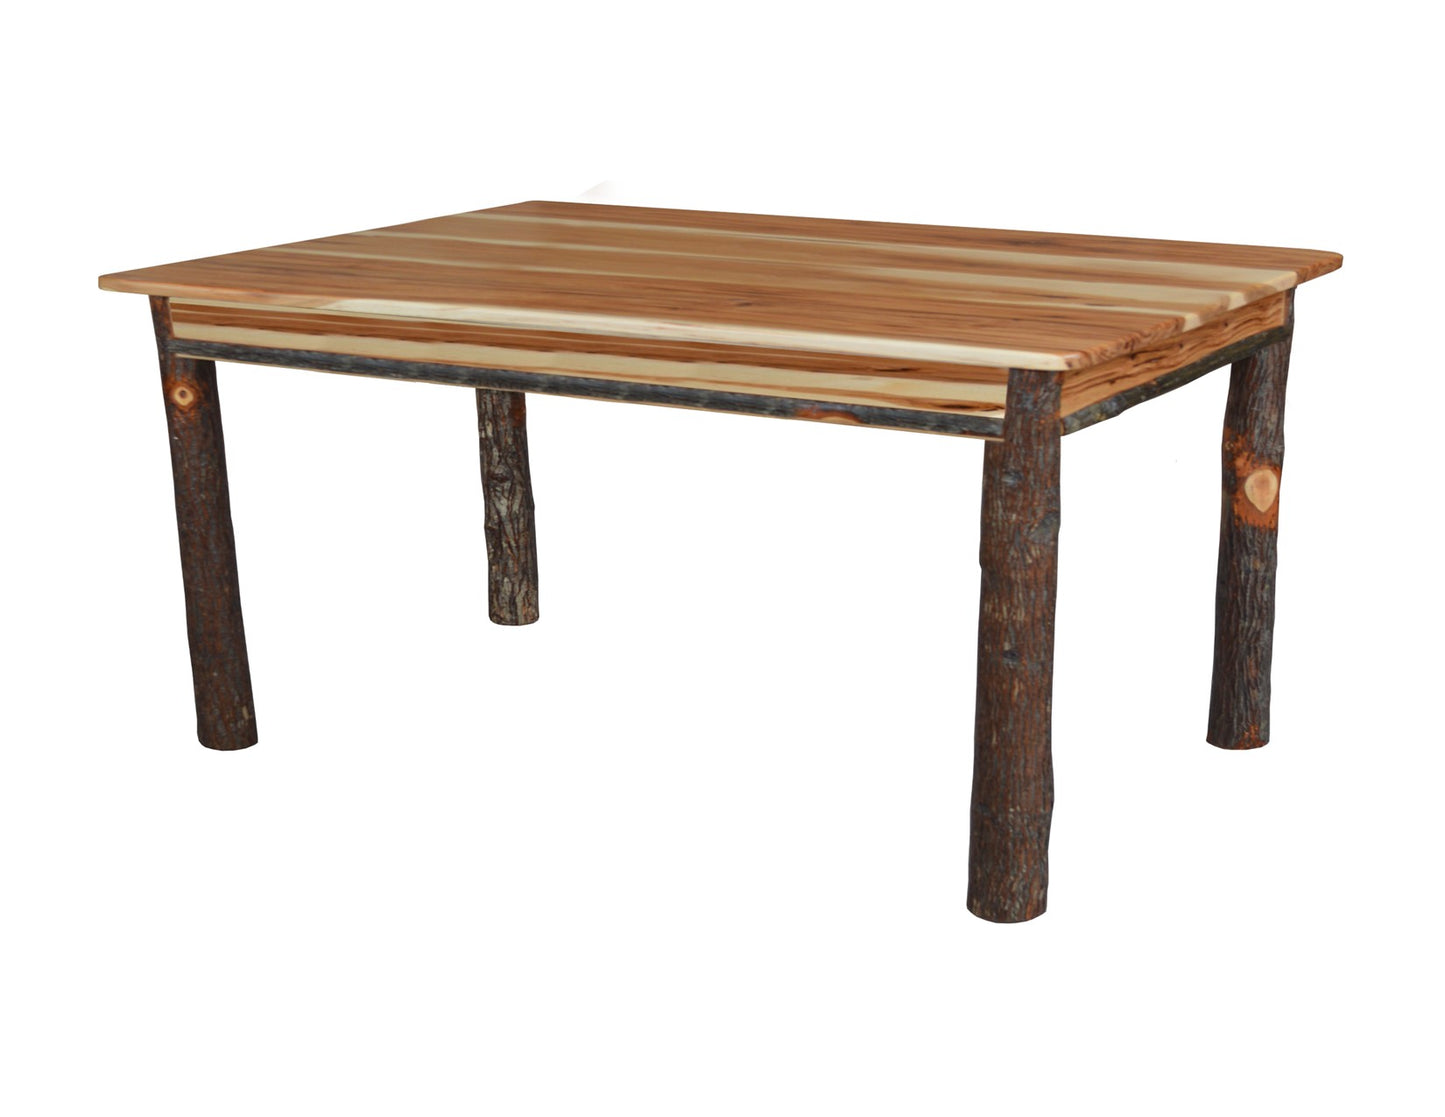 A&L Furniture Co. 4' Hickory Farm Table - LEAD TIME TO SHIP 4 WEEKS OR LESS